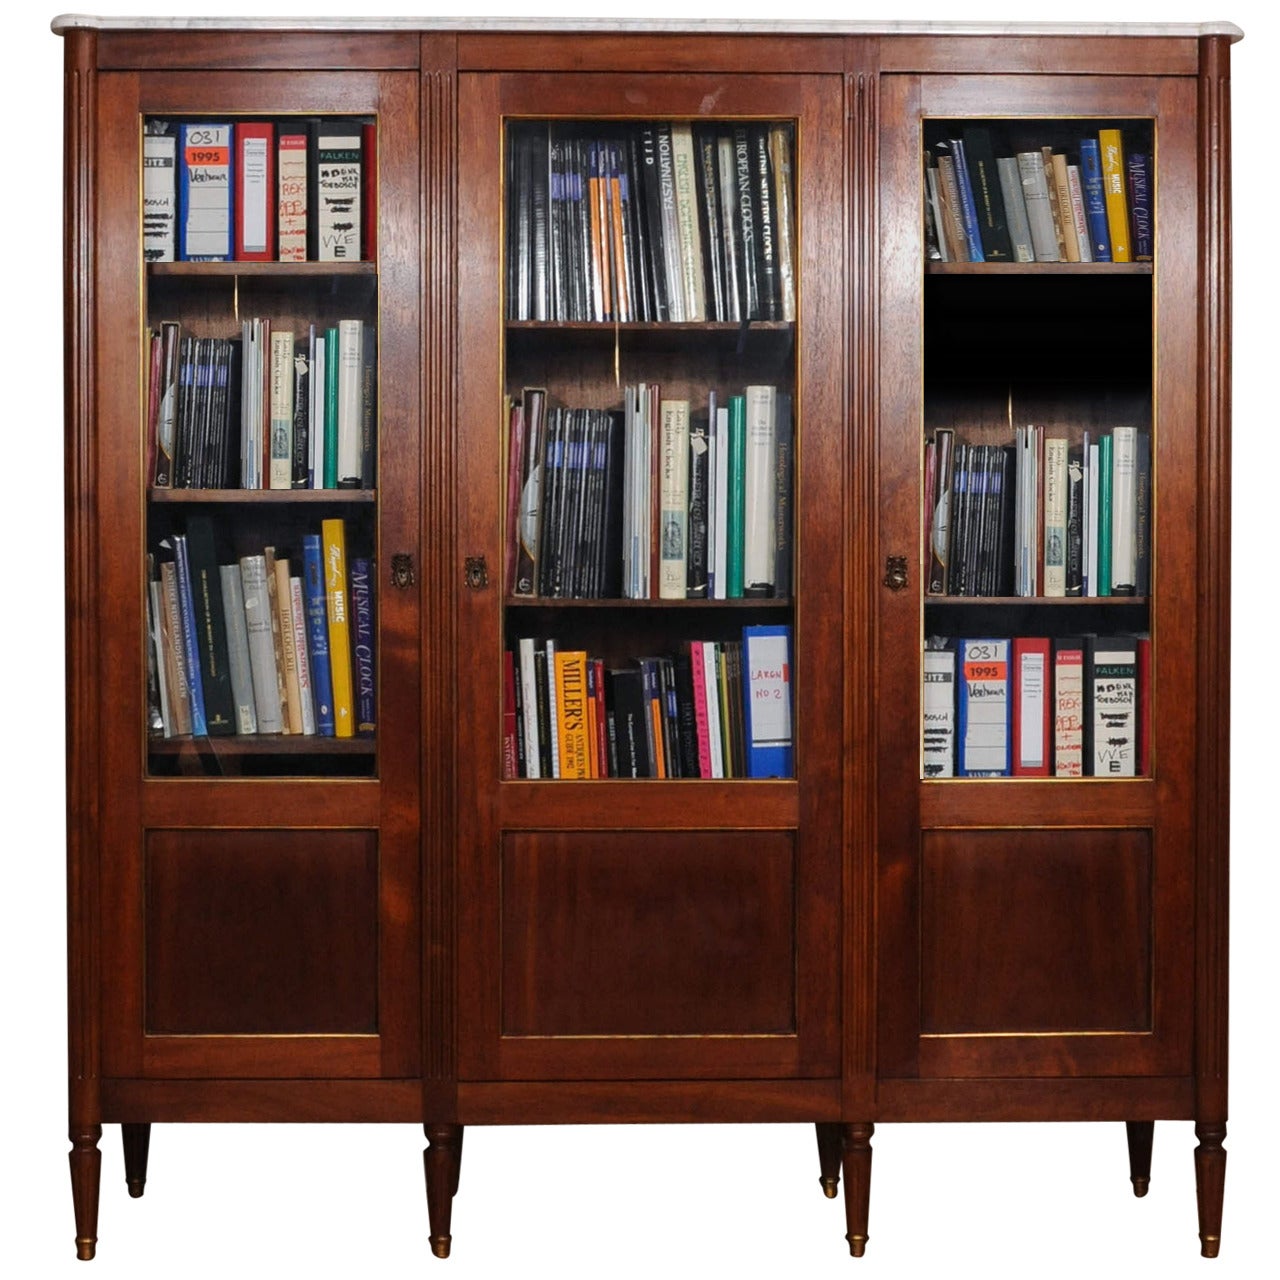 A probably French mahogany well-proportioned bookshelf, circa 1880